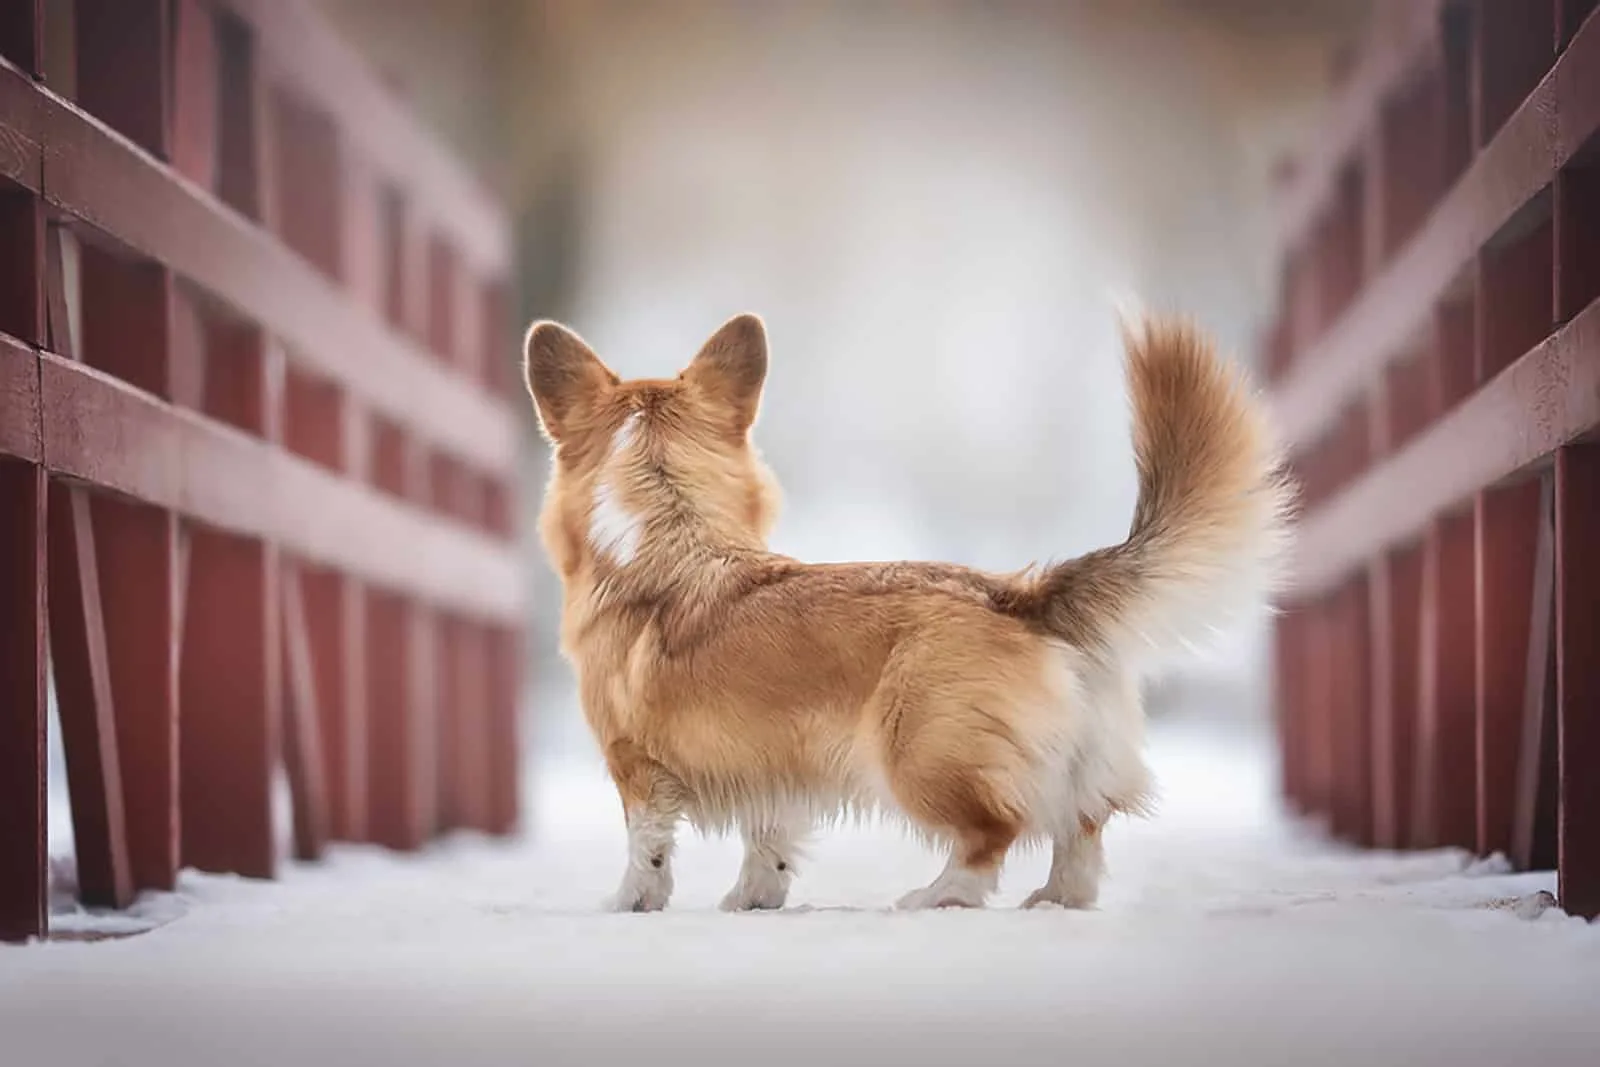 pembroke welsh corgi with a fluffy tail standing on the bridge